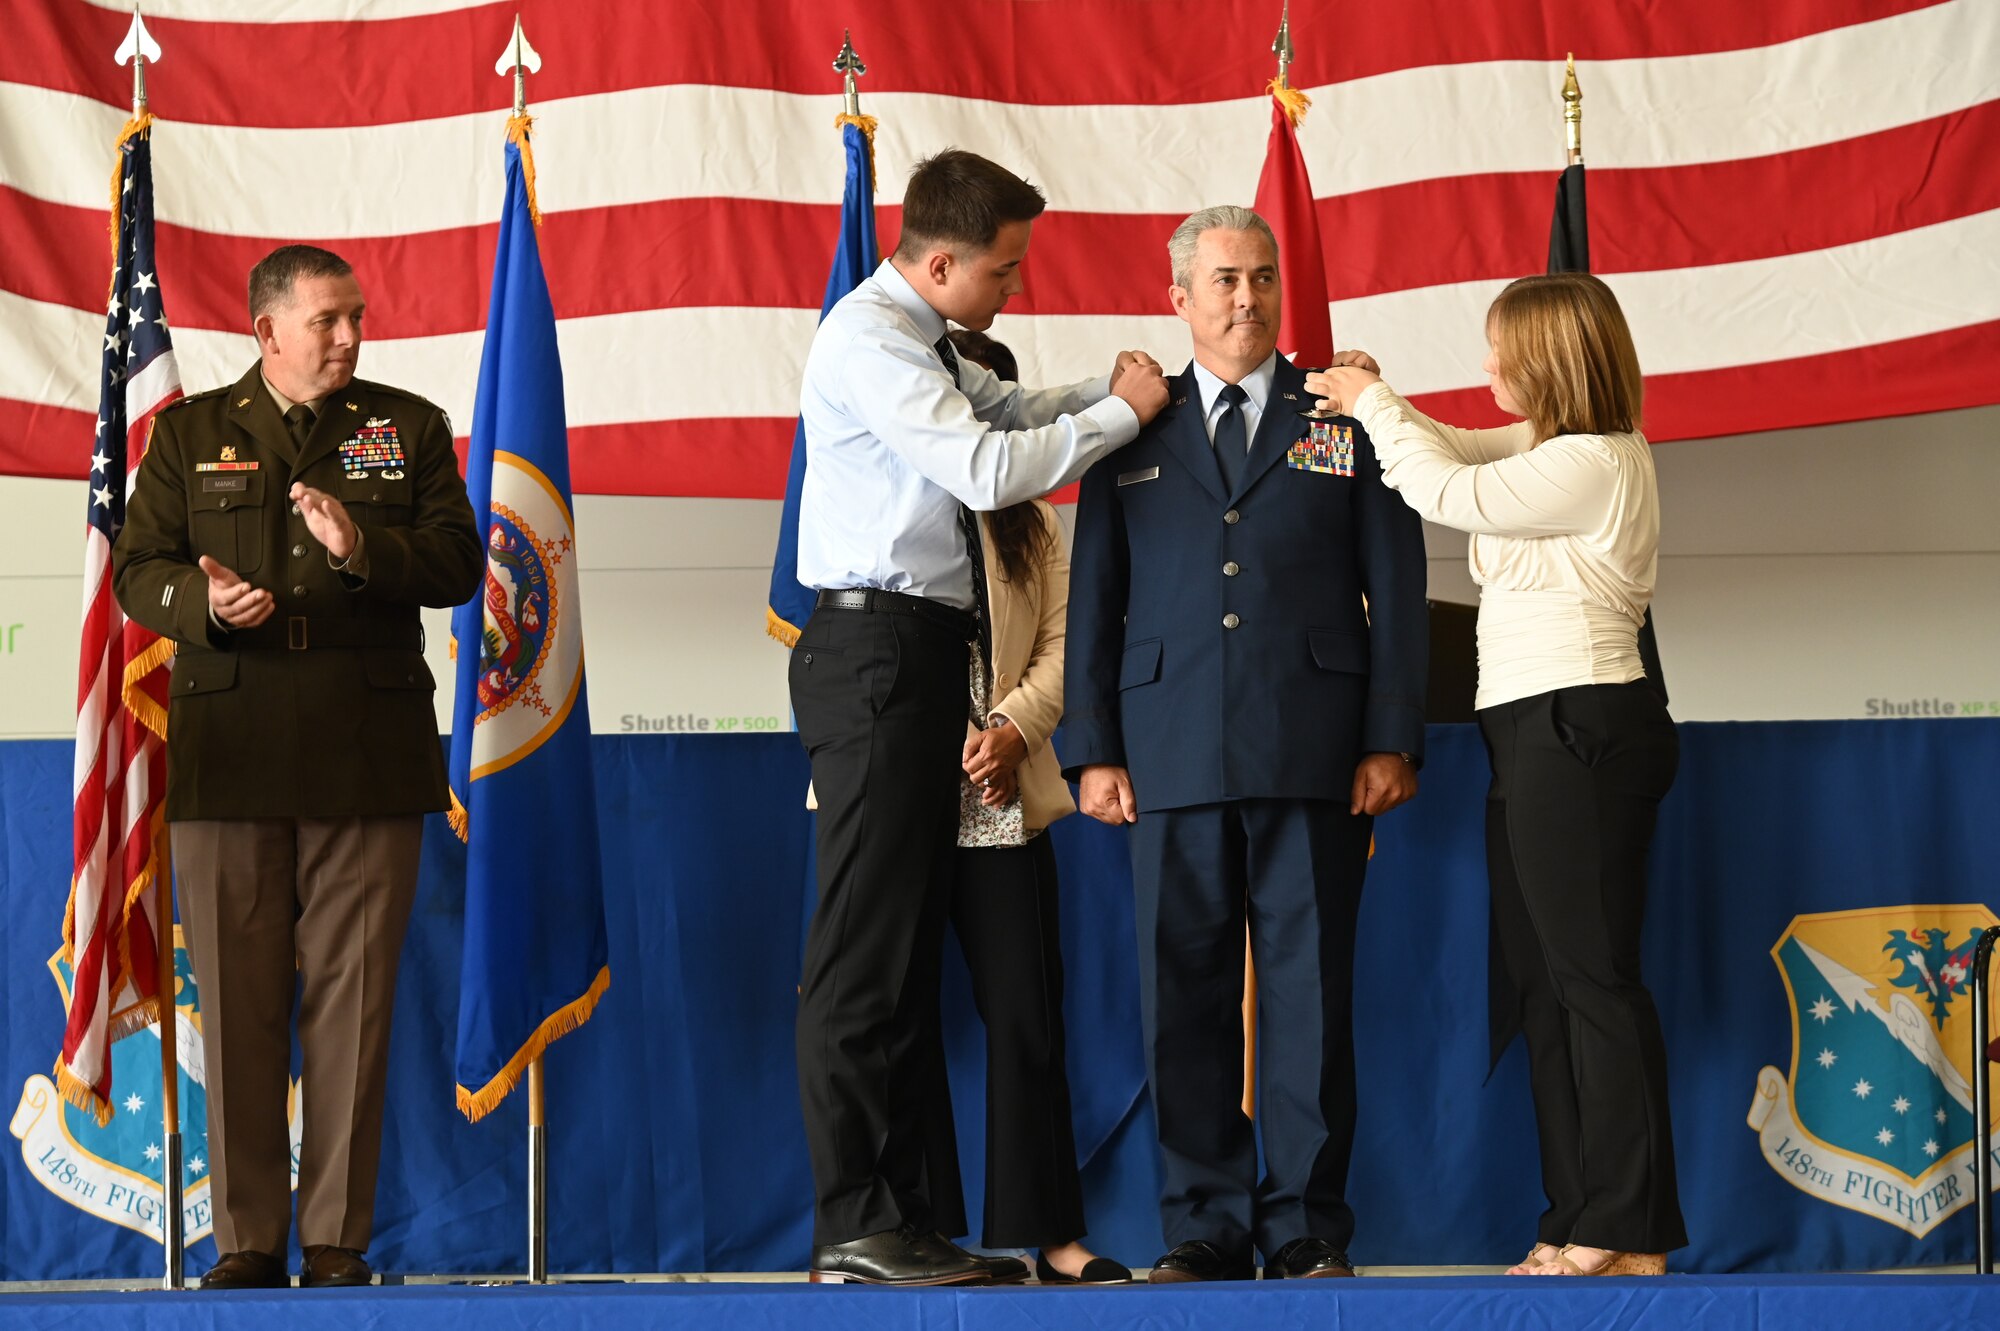 U.S. Air Force Col. Chris Blomquist was promoted to Brigadier General during a promotion ceremony at the 148th Fighter Wing, Duluth, Minn., 10 Sept. 2022.